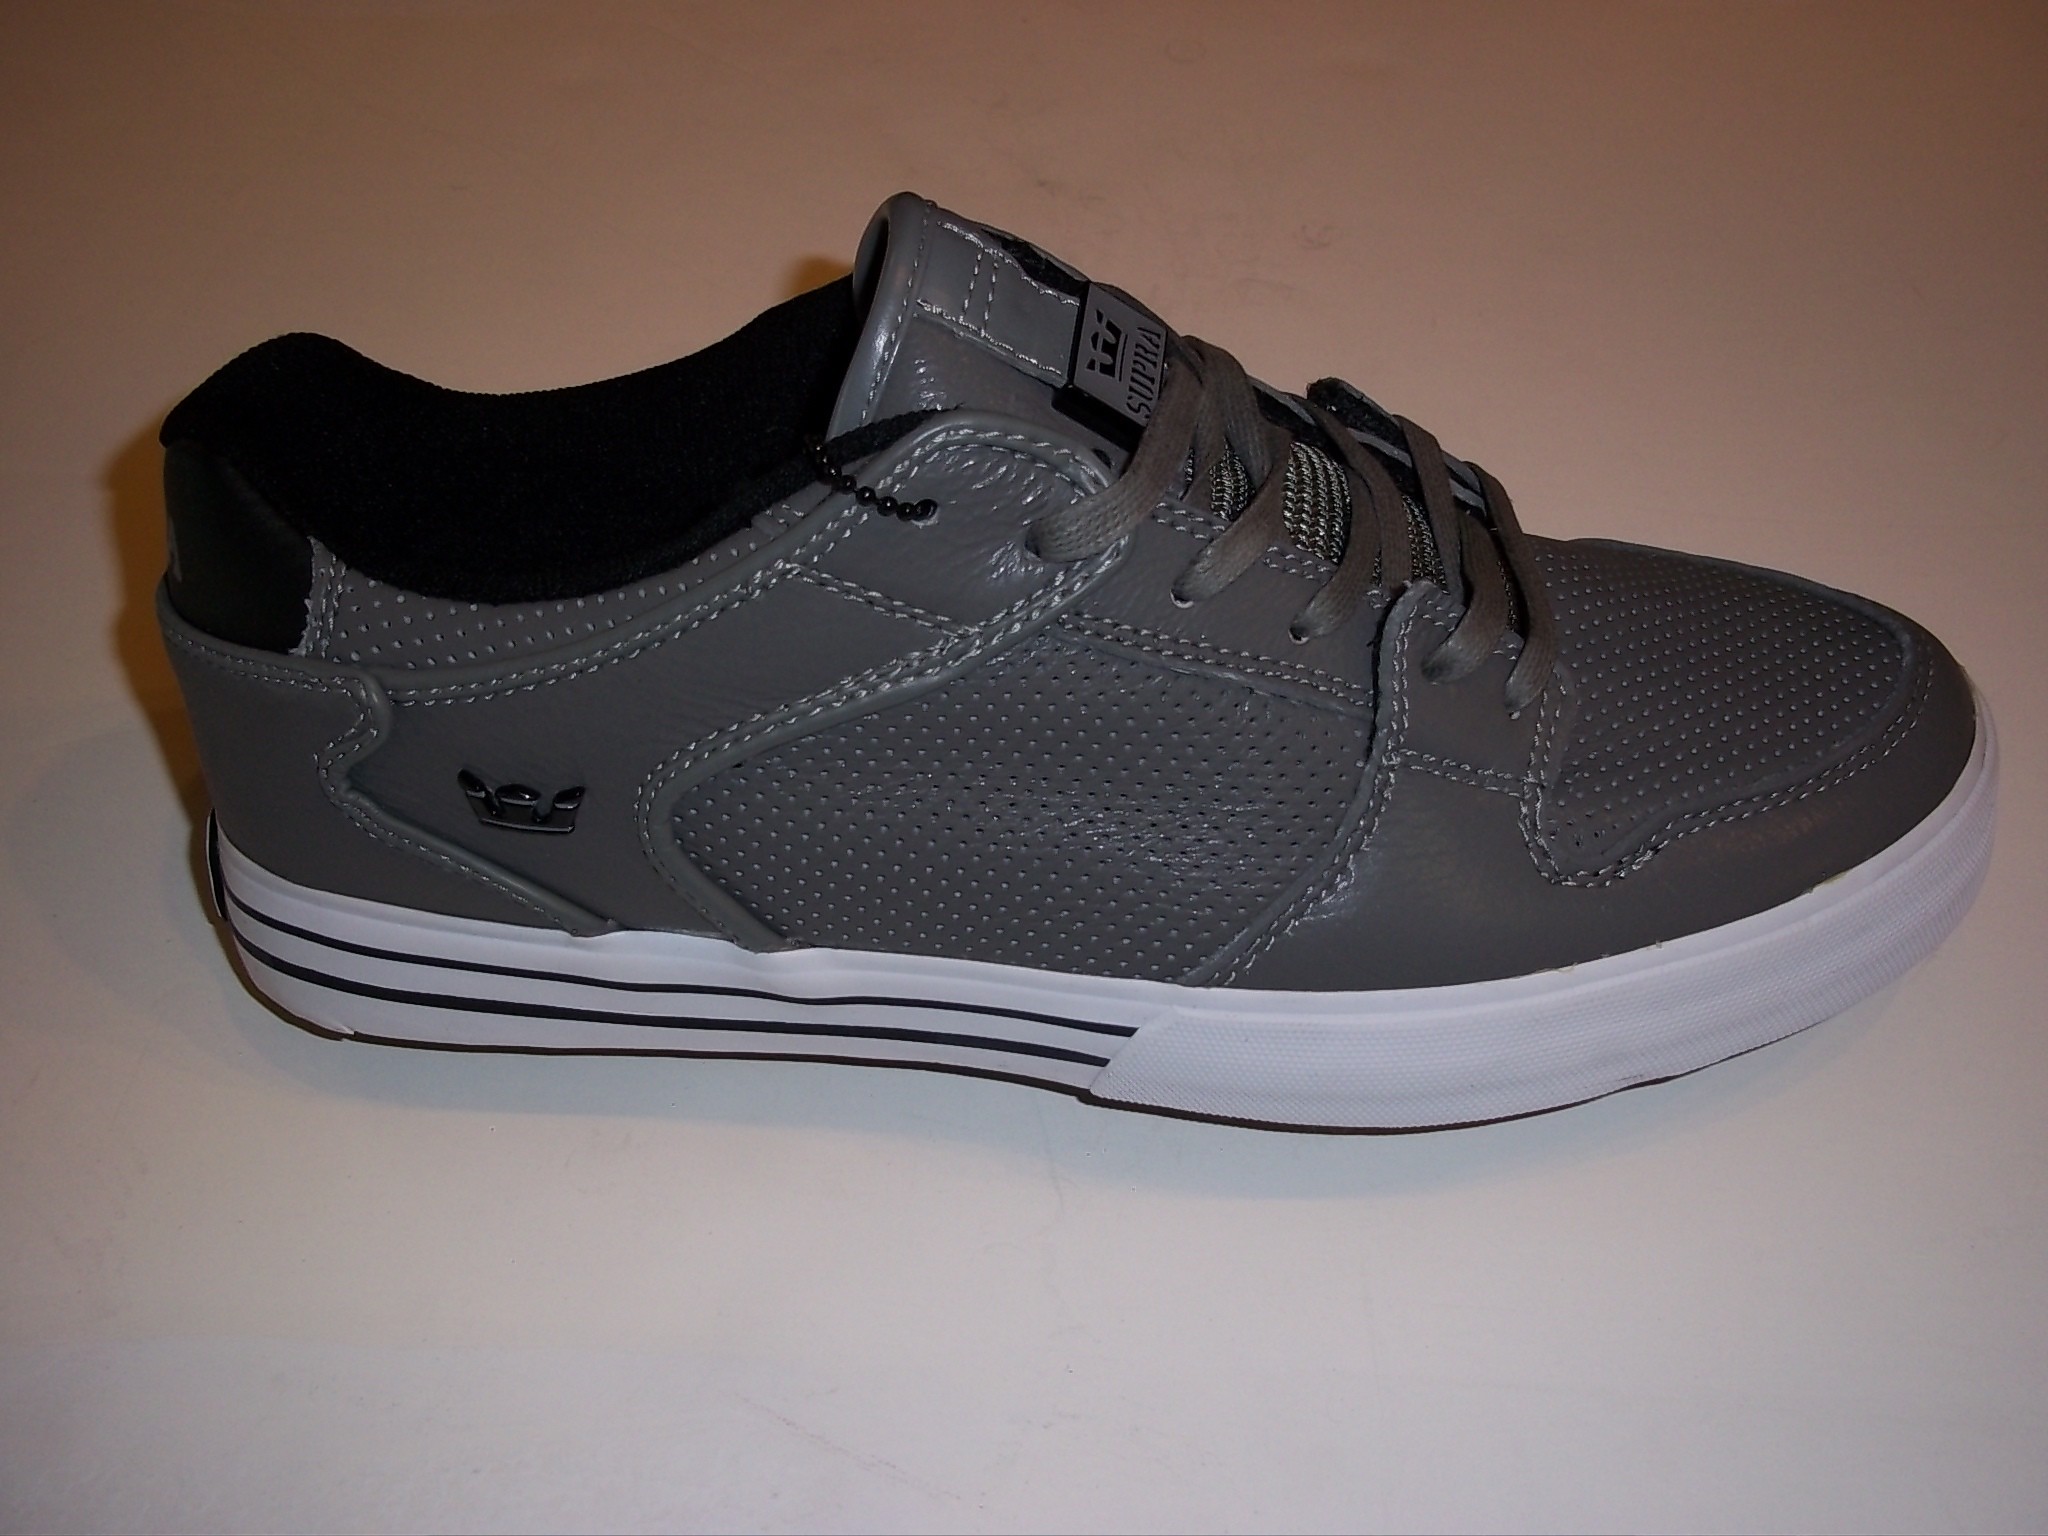 2048x1536 New SUPRA shoes! – Other Supra shoes are on sale